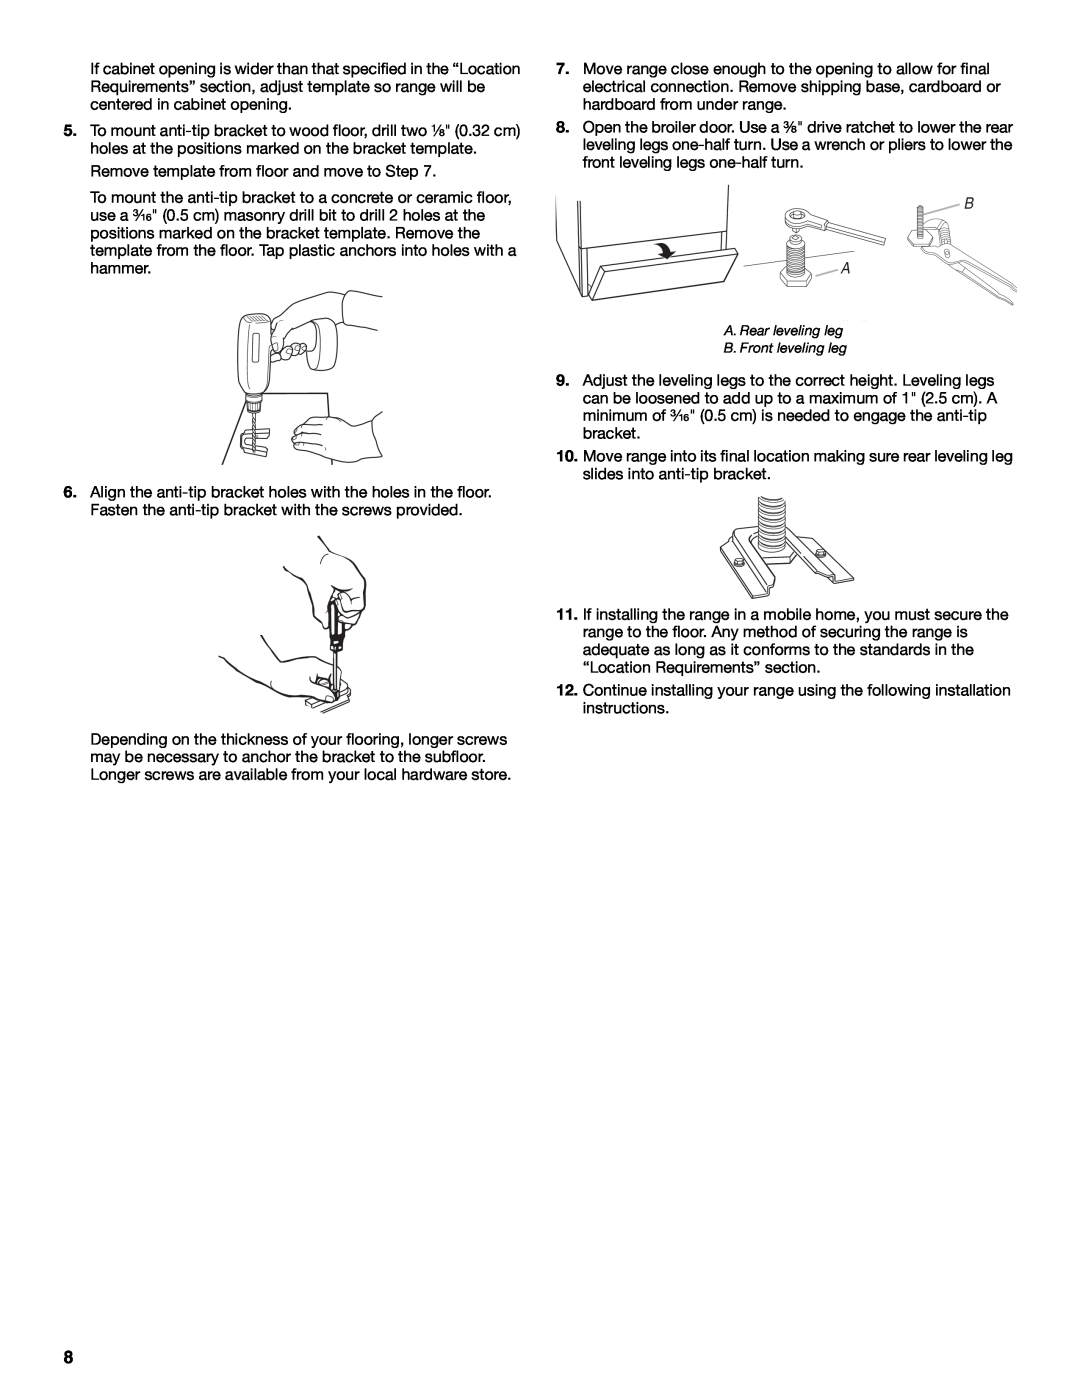 Whirlpool W100329708 installation instructions Remove template from floor and move to Step 